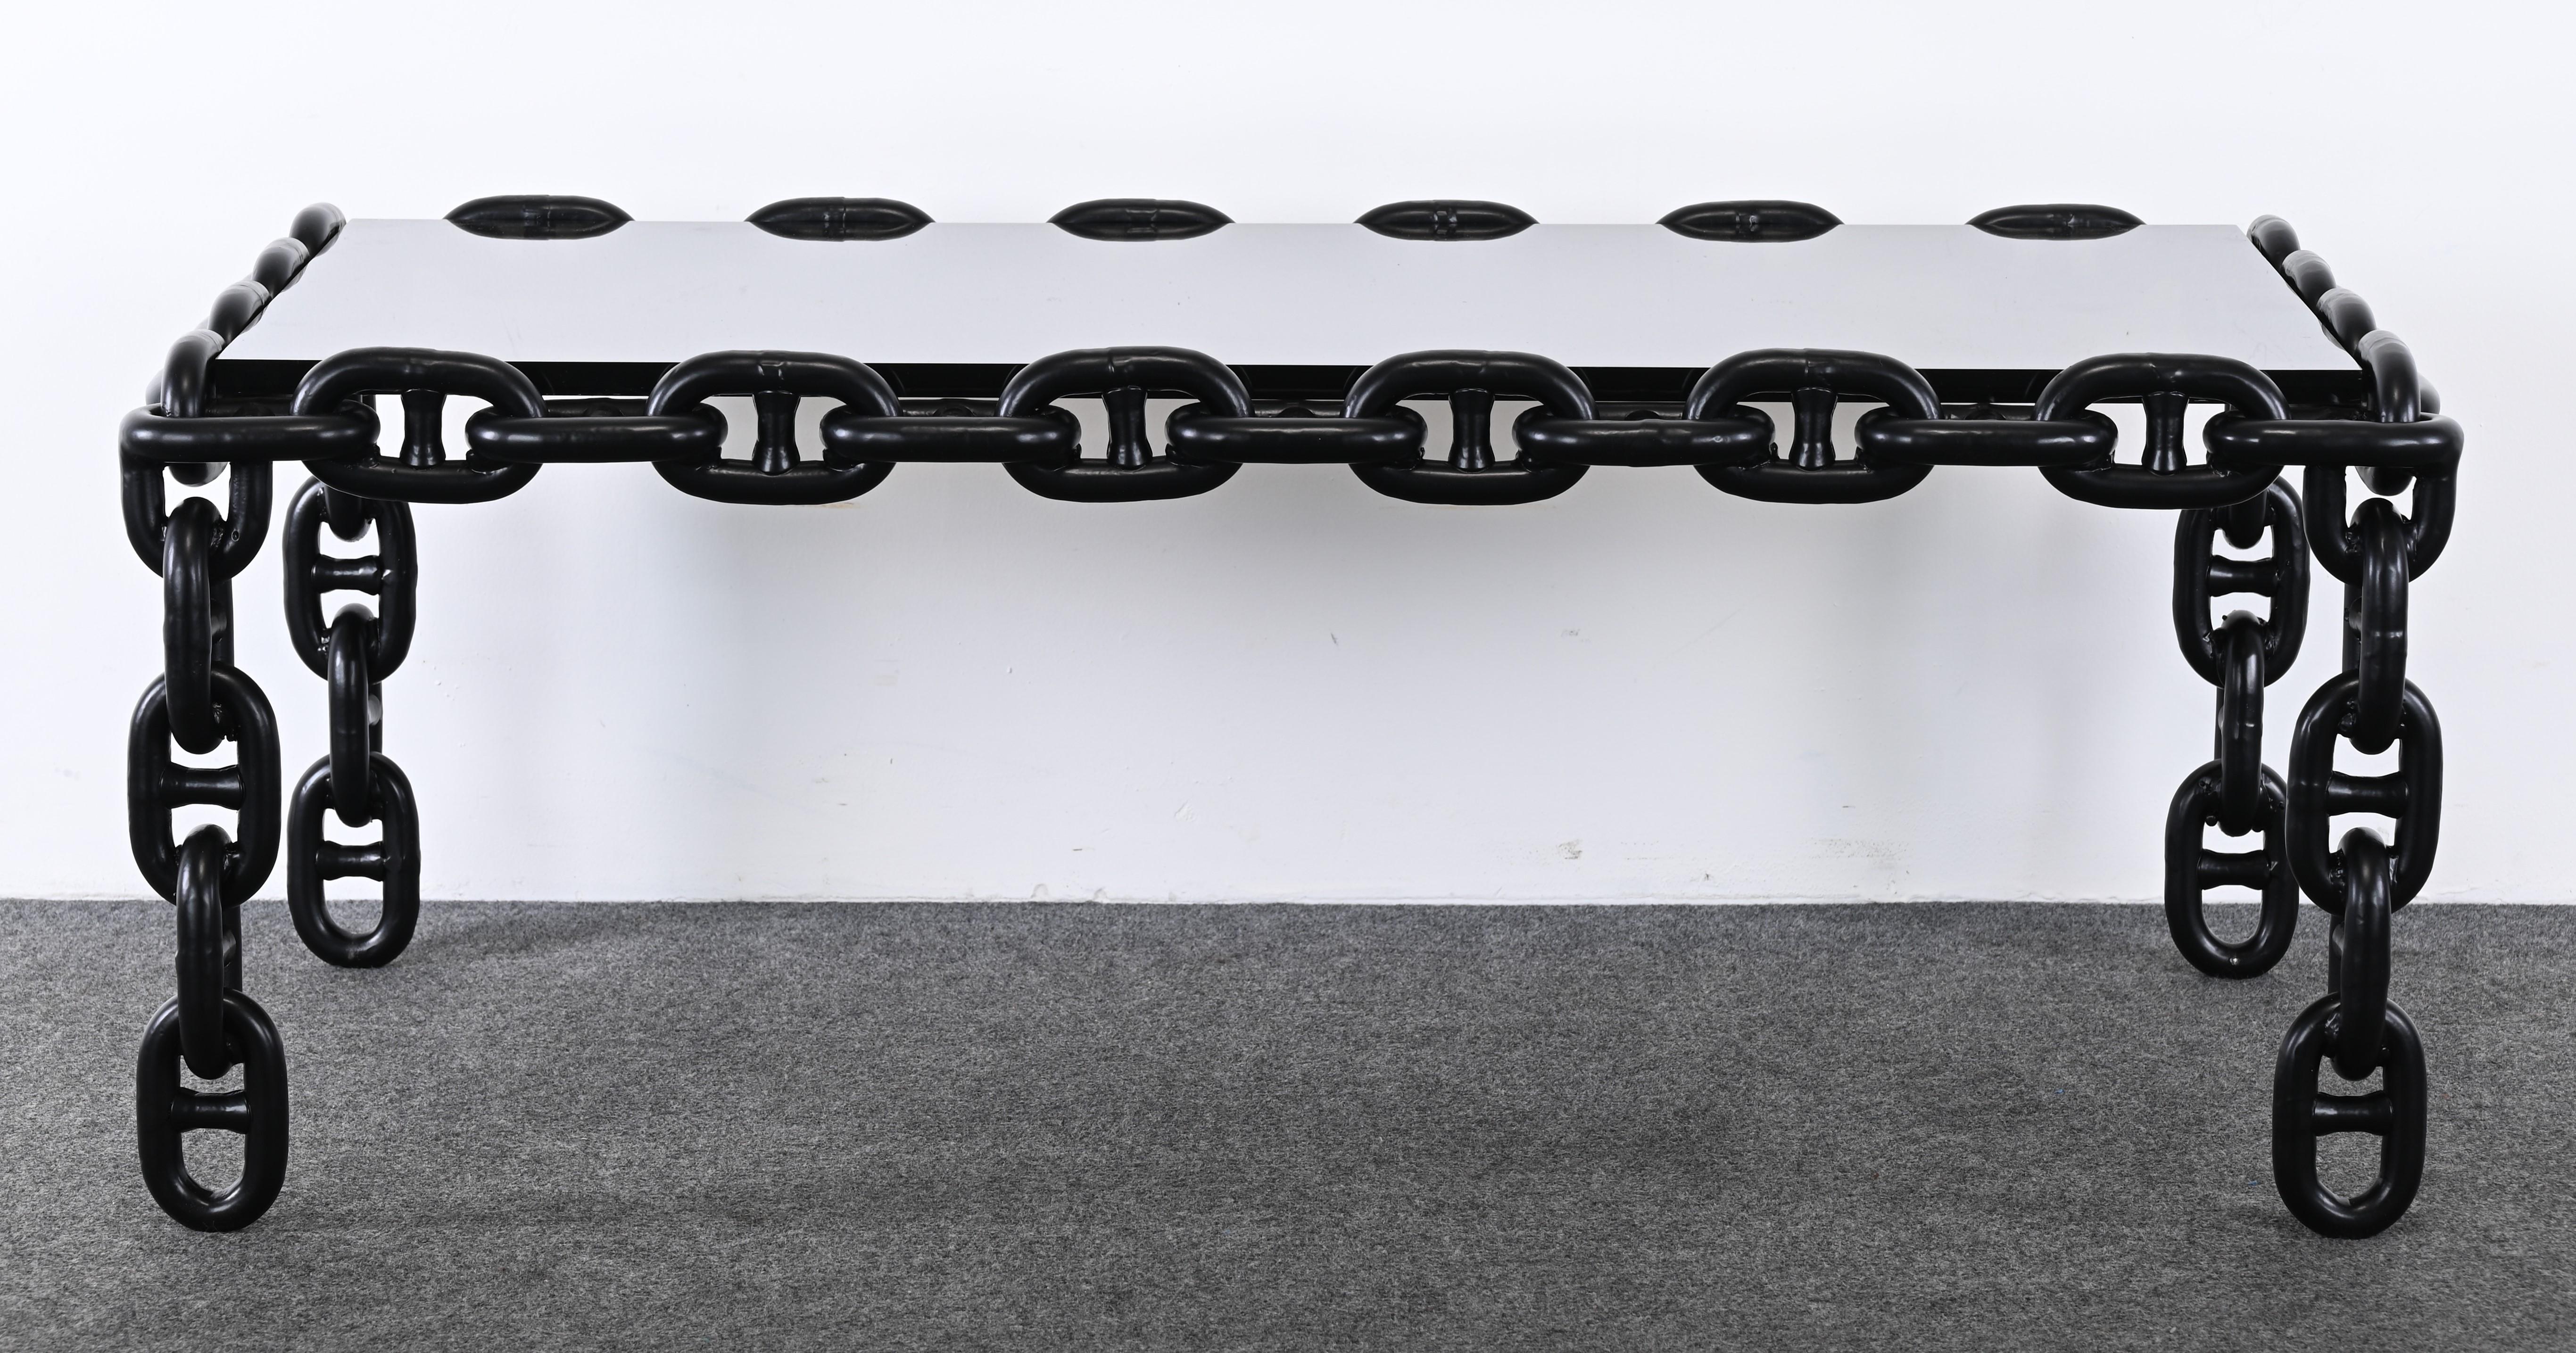 A handsome Mid-Century Modern welded steel coffee table powder coated in matte black finish and ready to place. The top is made of original smoked plexiglass or acrylic. Some scratches to the surface as shown in the images. The surface has been